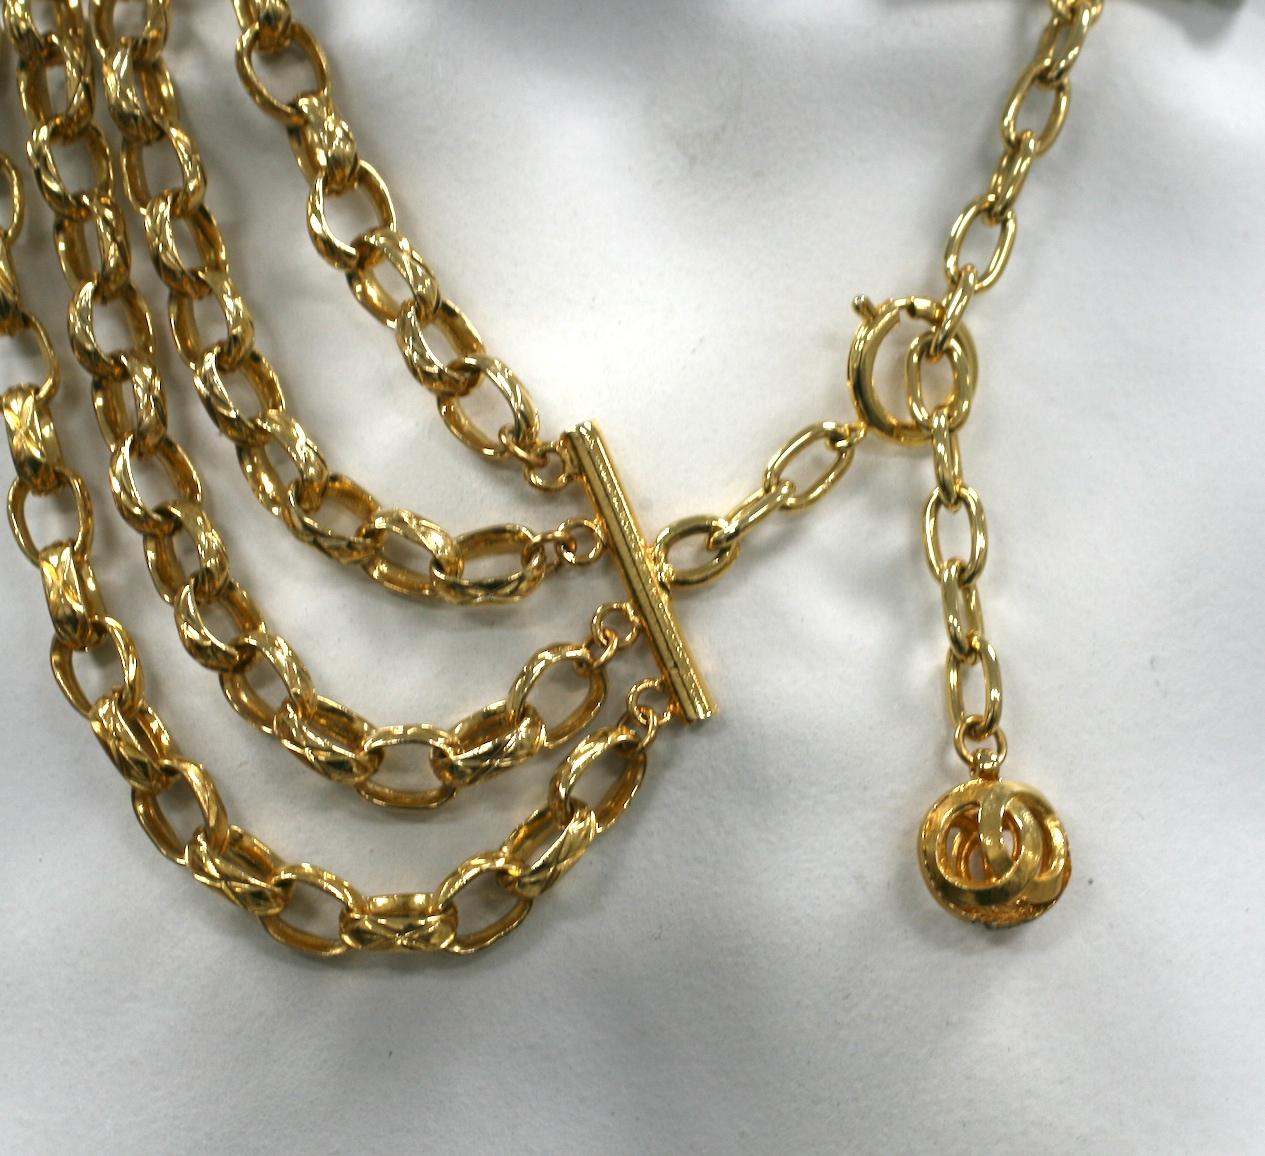 Chanel 4 Strand Textured Chain Necklace For Sale 6